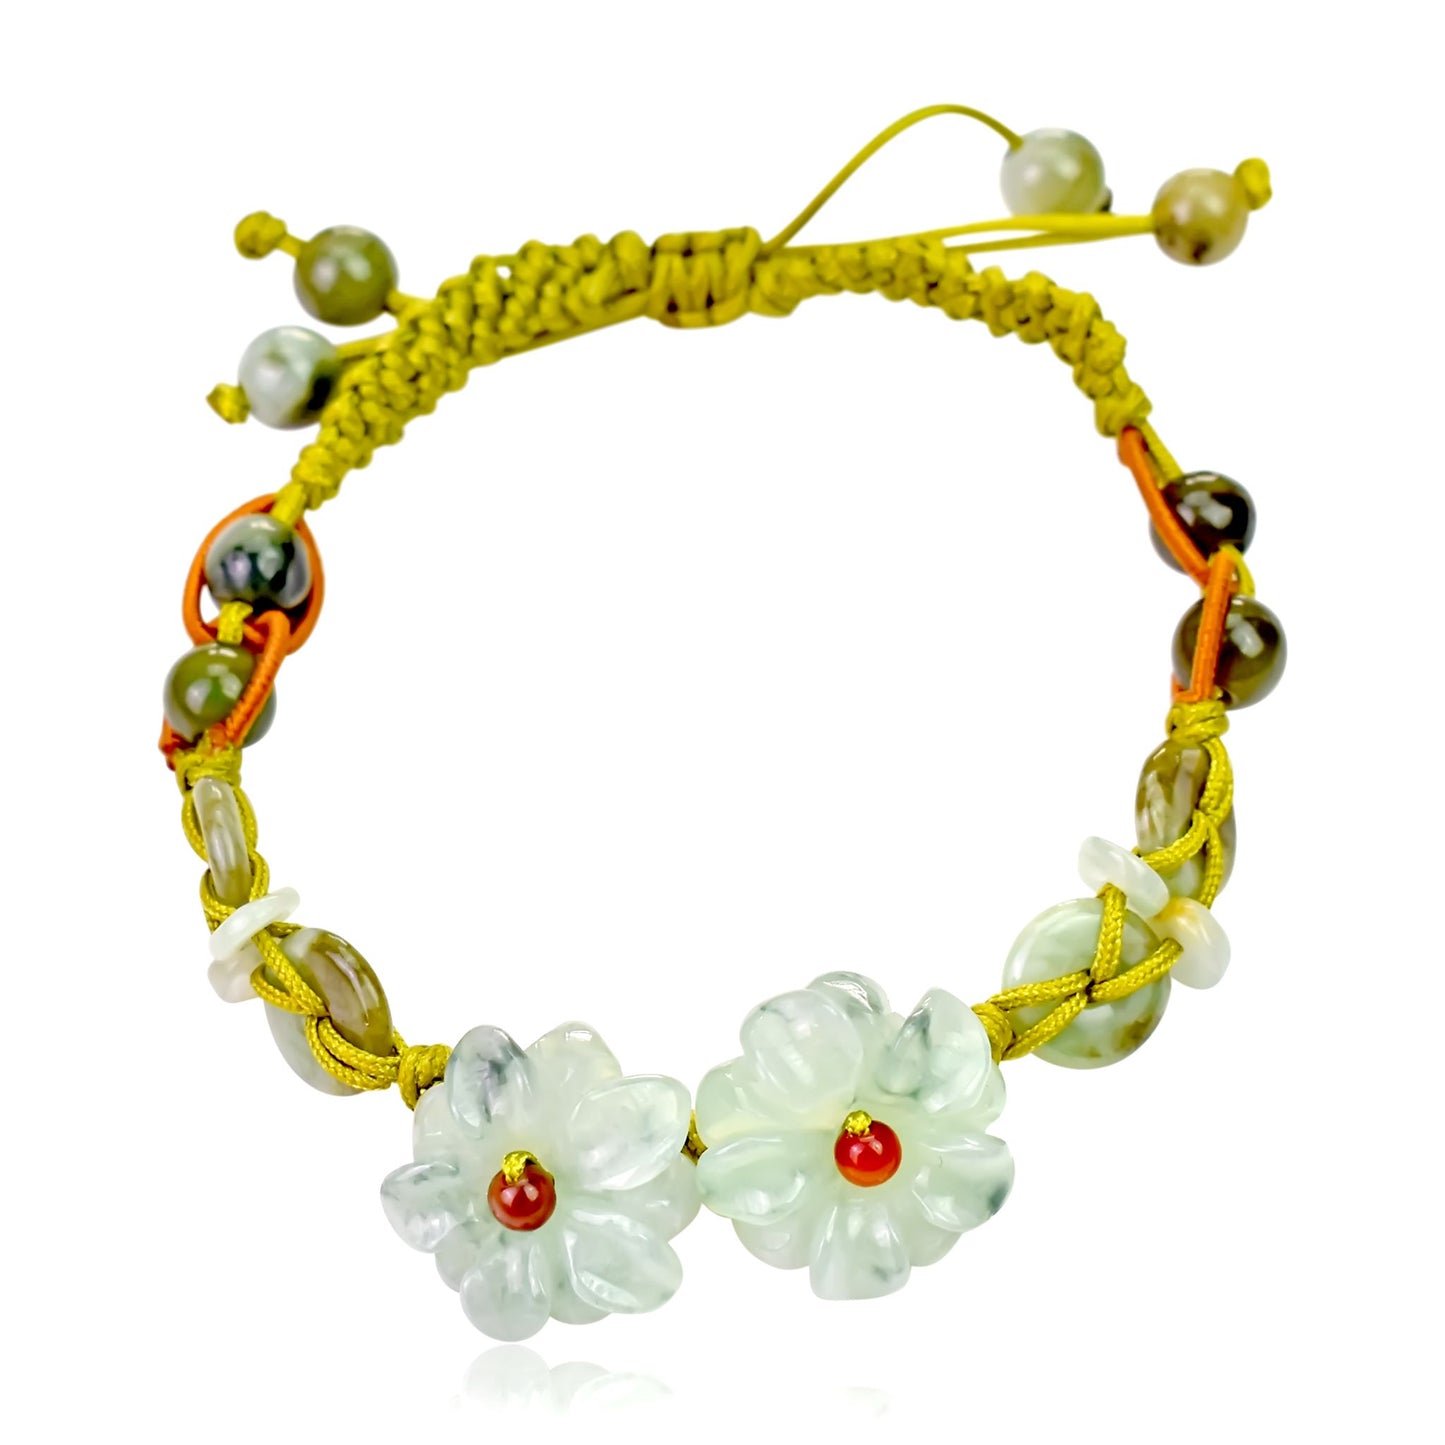 Be Uniquely Stylish with the Double Mums Adjustable Charm Bracelet made with Lime Cord